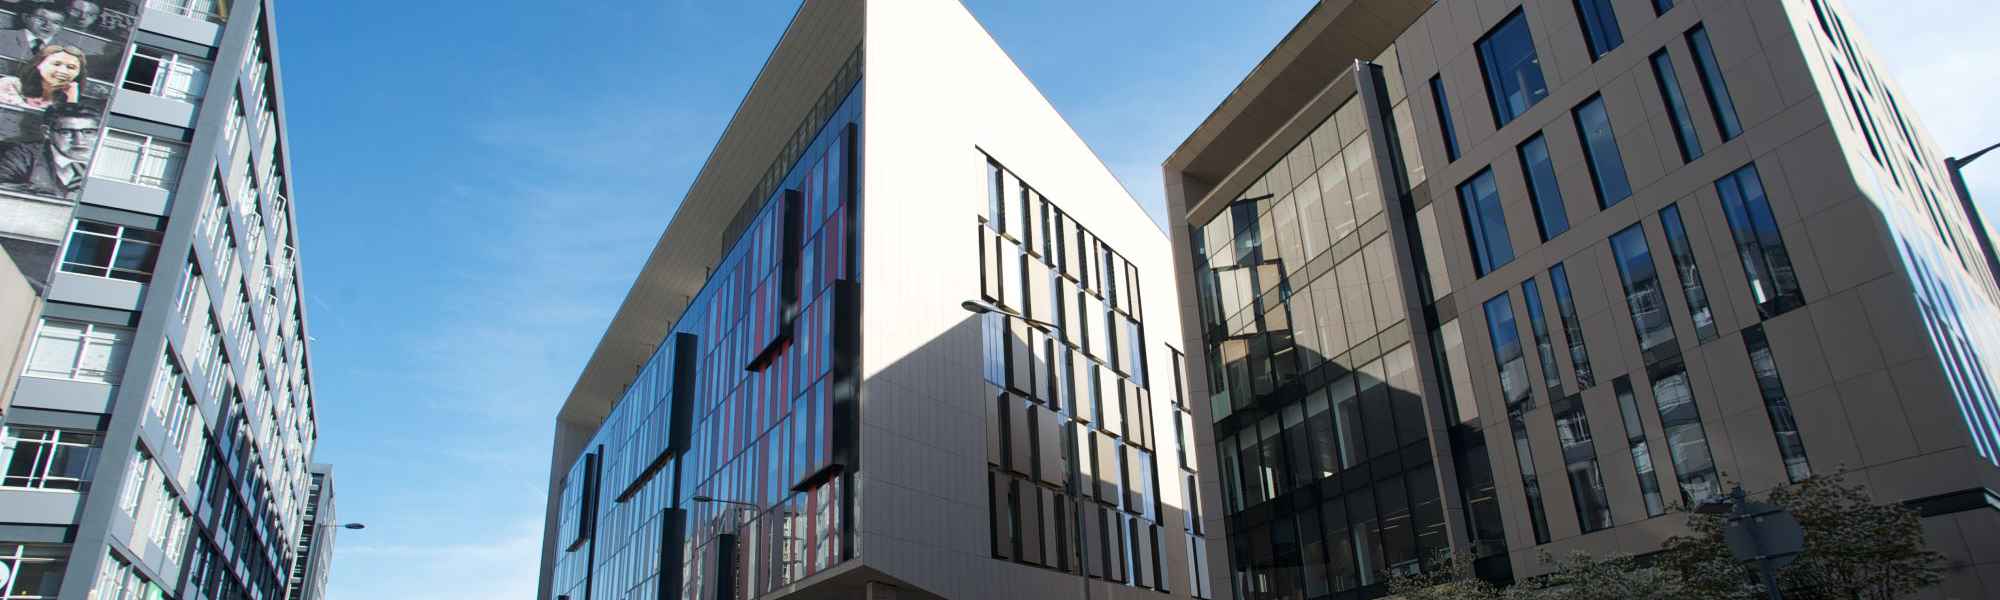 Technology & Innovation Centre and Inovo Building, George Street, Glasgow